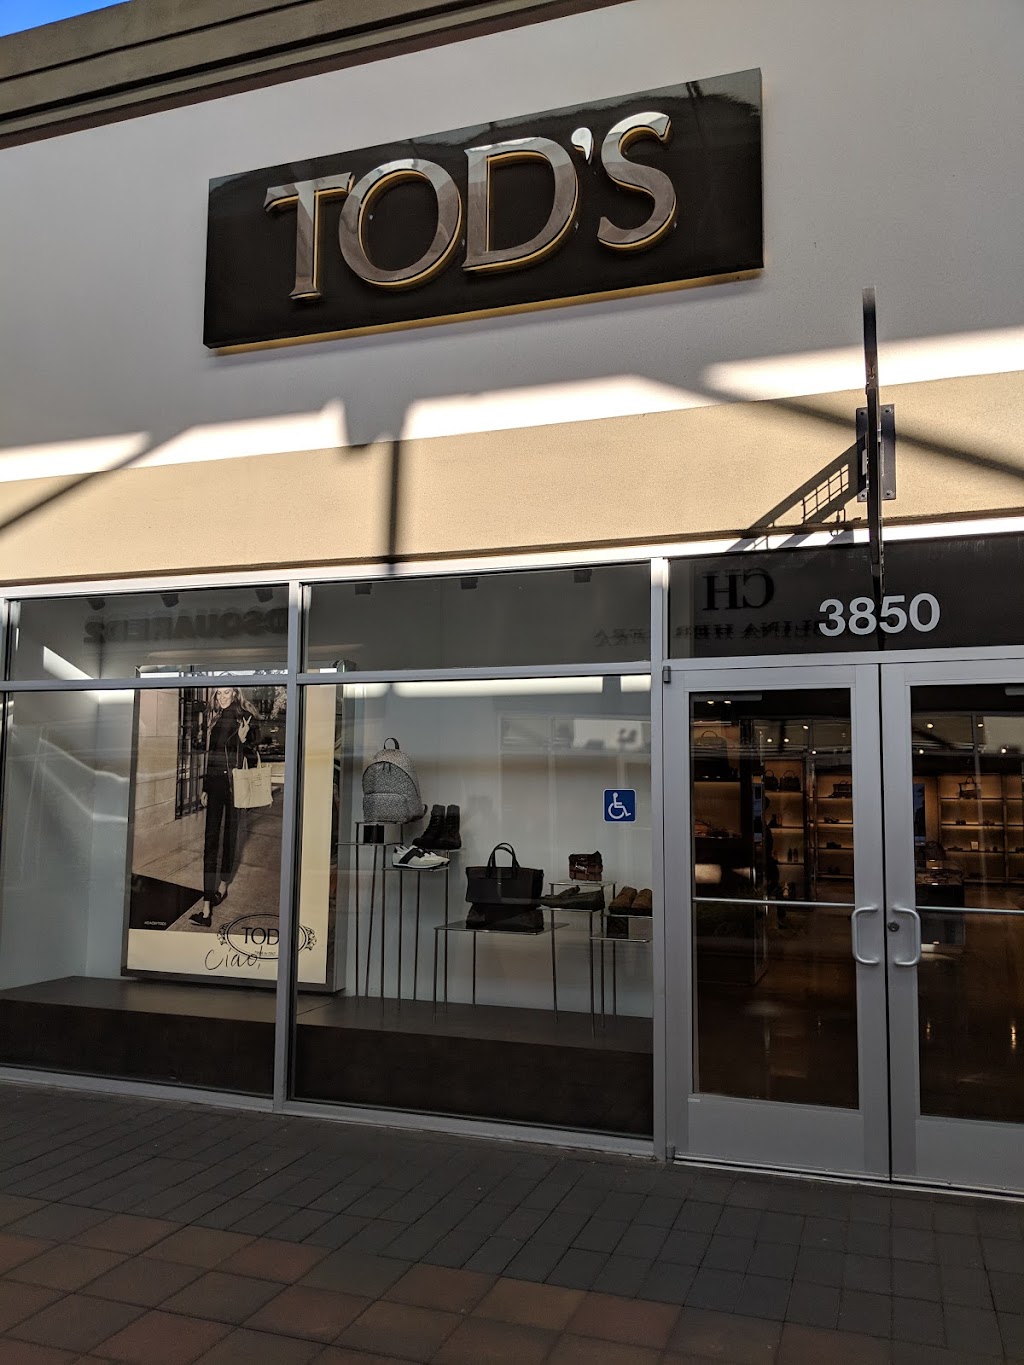 Tods | 3850 Livermore Outlets Dr #94551, Livermore, CA 94551 | Phone: (925) 294-9240